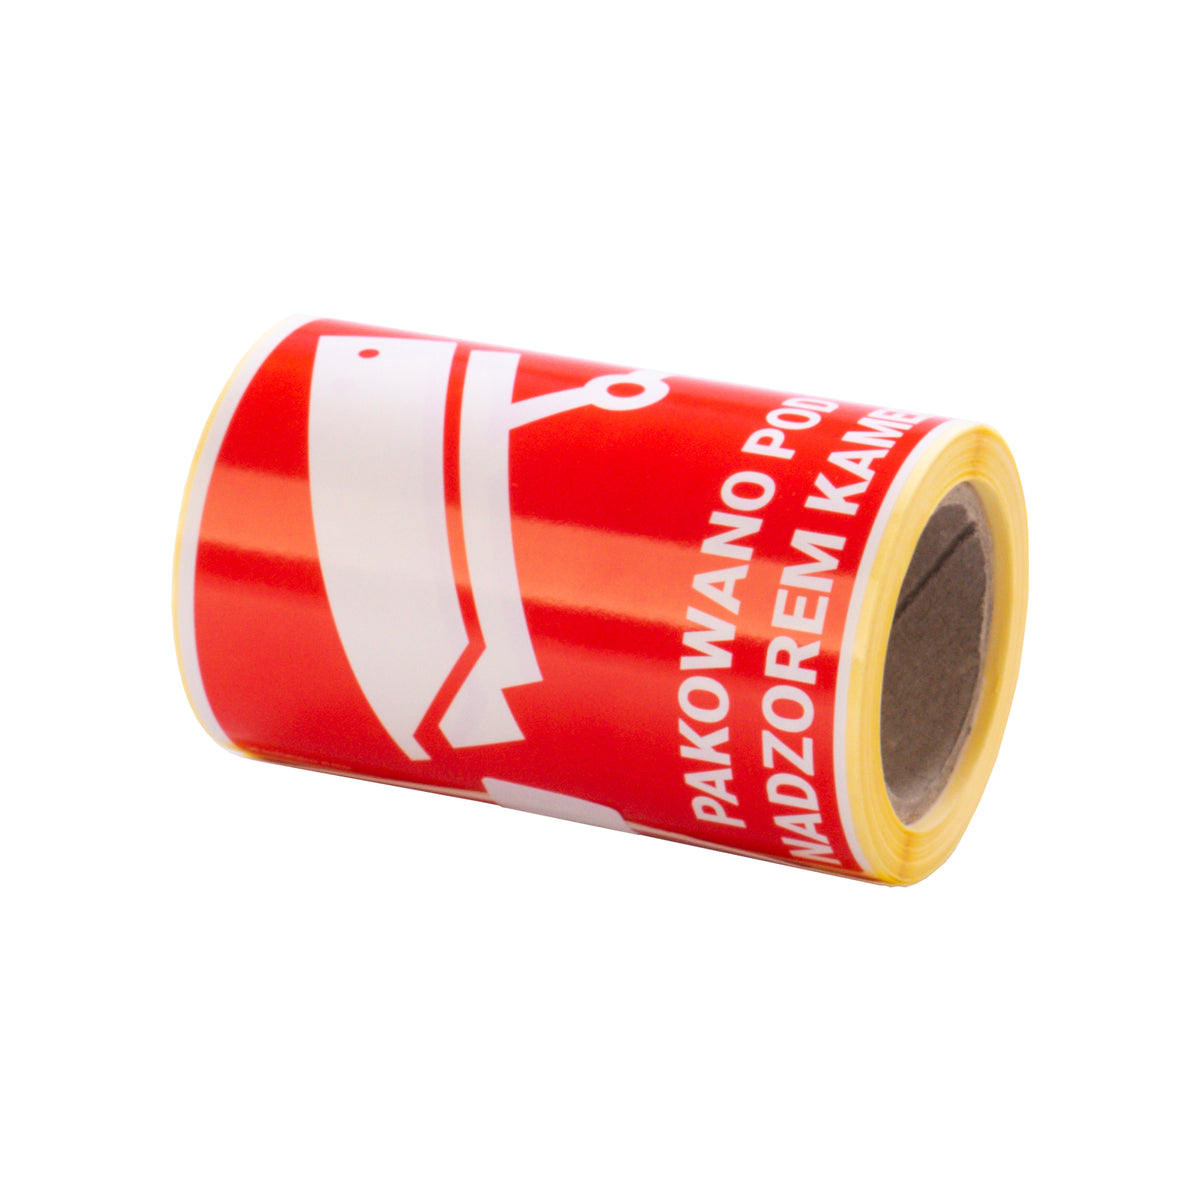 Self-adhesive warning labels - Packaged under camera surveillance! - 98x98mm 100 per roll